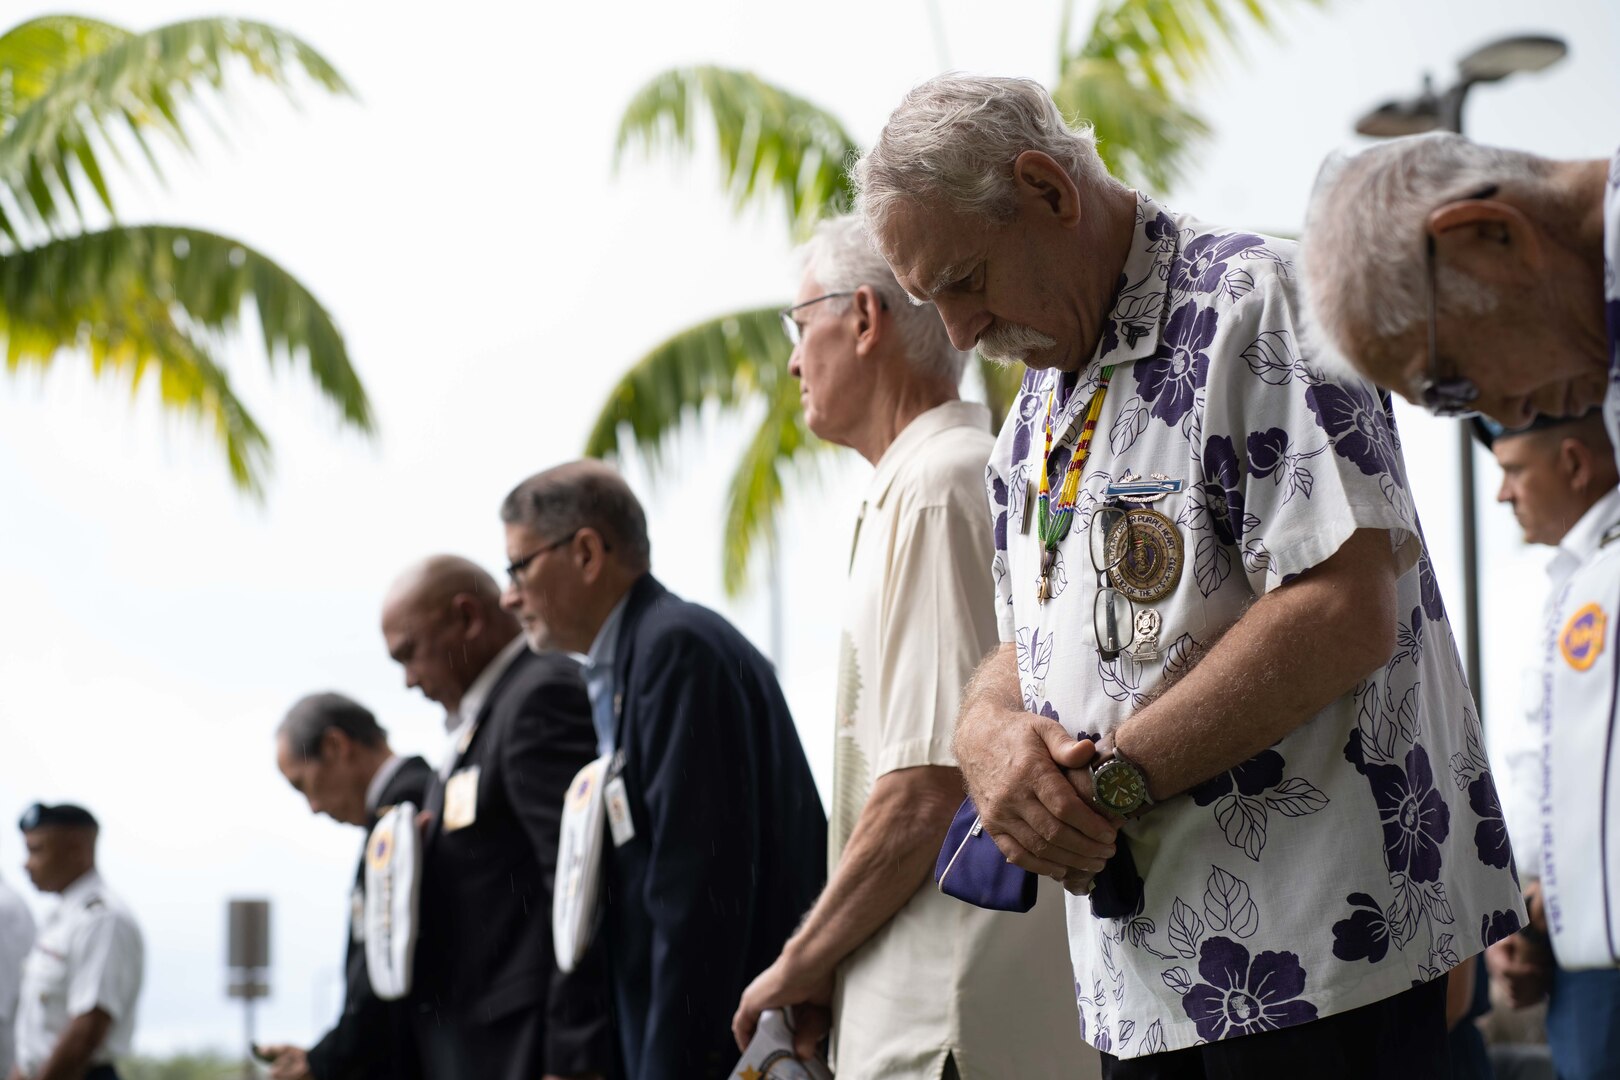 Attendees of the 50th anniversary of Operation Homecoming ceremony, bow their heads during the invocation at Joint Base Pearl Harbor-Hickam, March 28, 2023. Following the release of U.S. Prisoners of War by the North Vietnamese, the newly freed U.S. service members were brought back to JBPHH and touched down on U.S. soil for the first time. (U.S. Marine Corps photo by Sgt. Zachary T. Beatty)